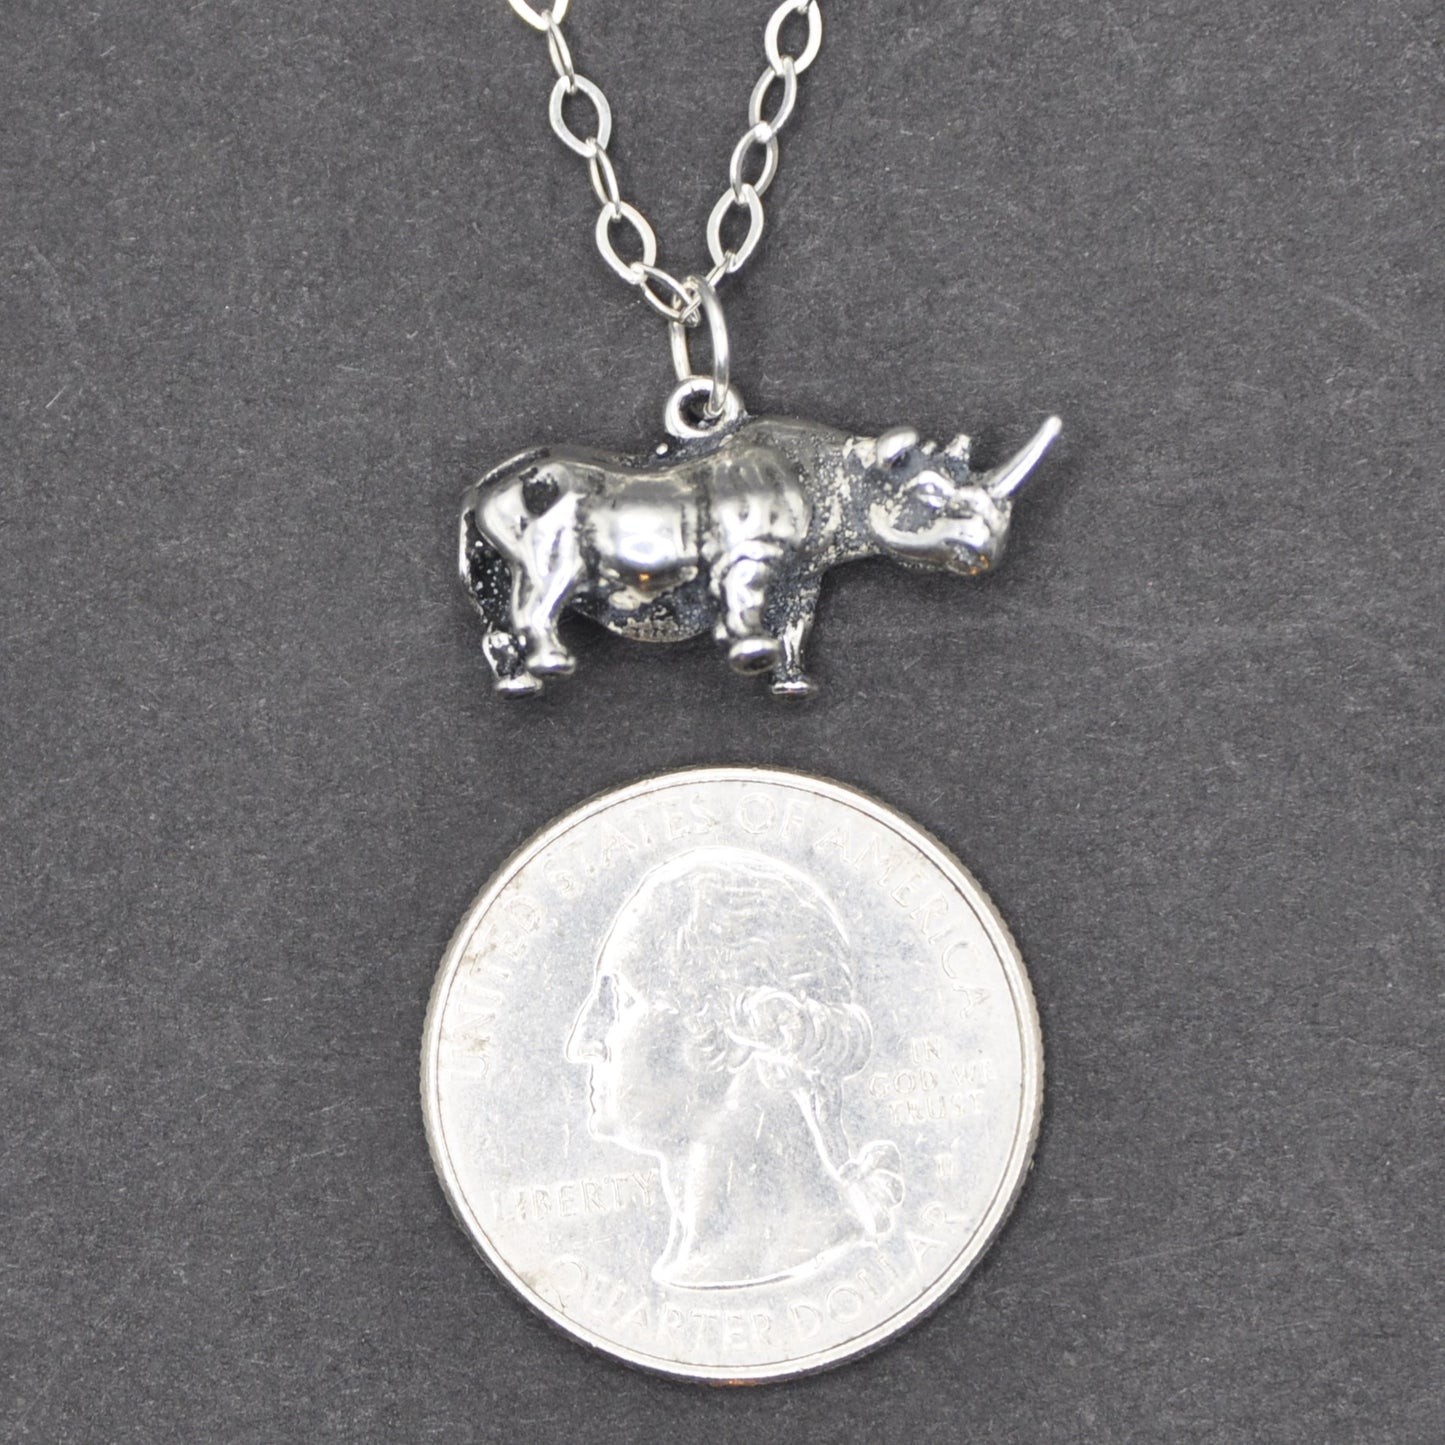 Rhinoceros Necklace Recycled Sterling Silver .925 Cable Chain Endangered Species